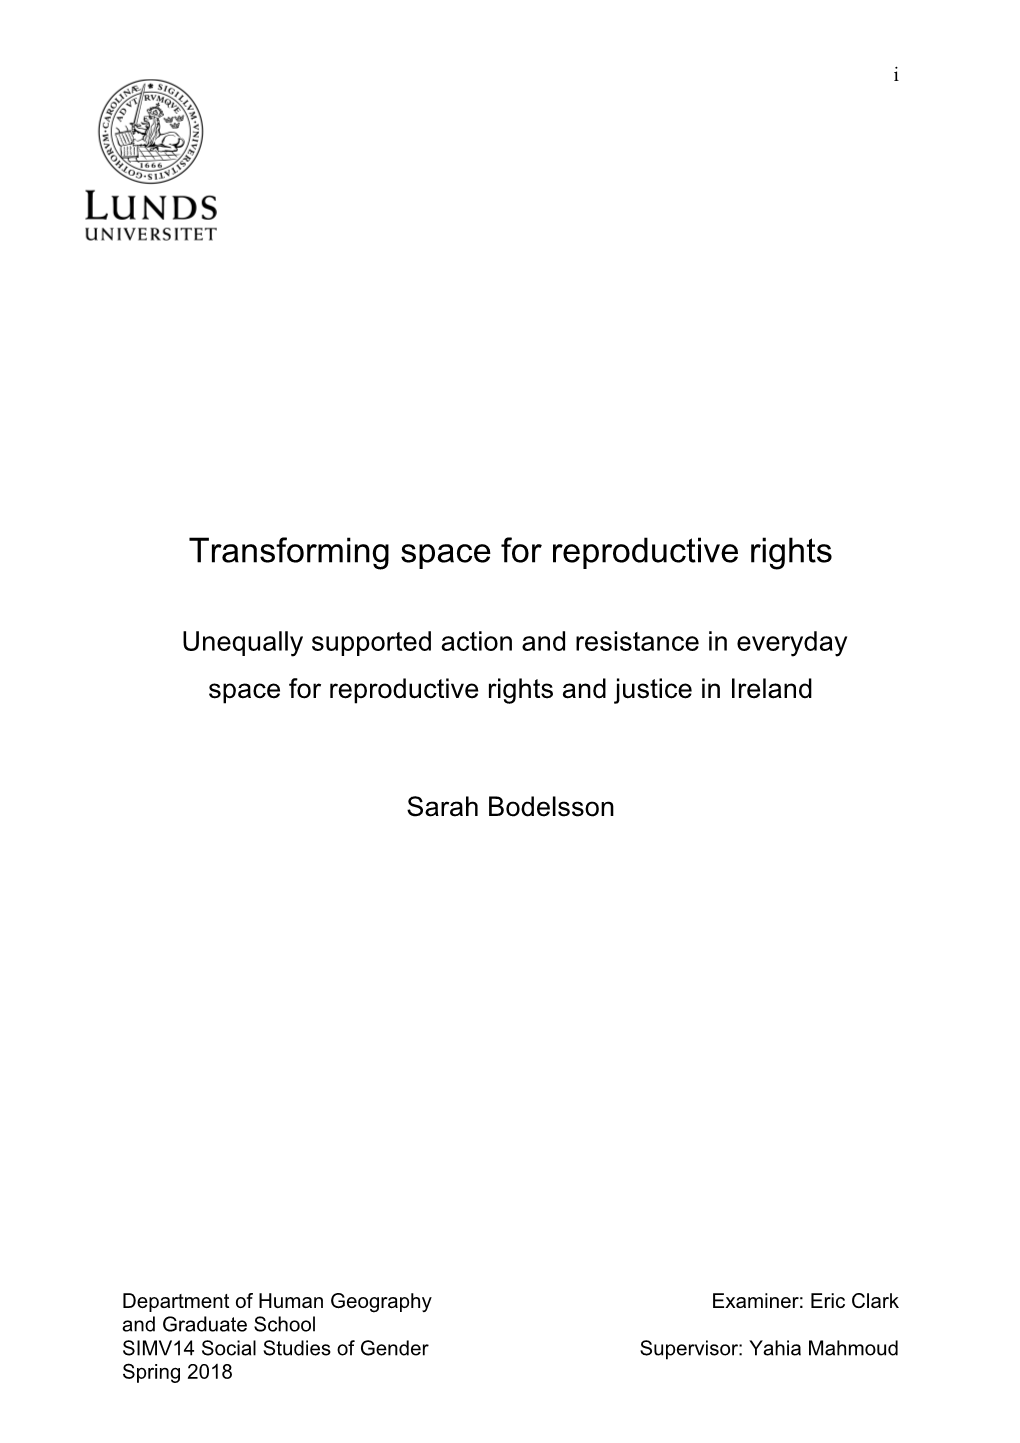 Unequally Supported Action and Resistance in Everyday Space for Reproductive Rights and Justice in Ireland Sarah Bodelsson